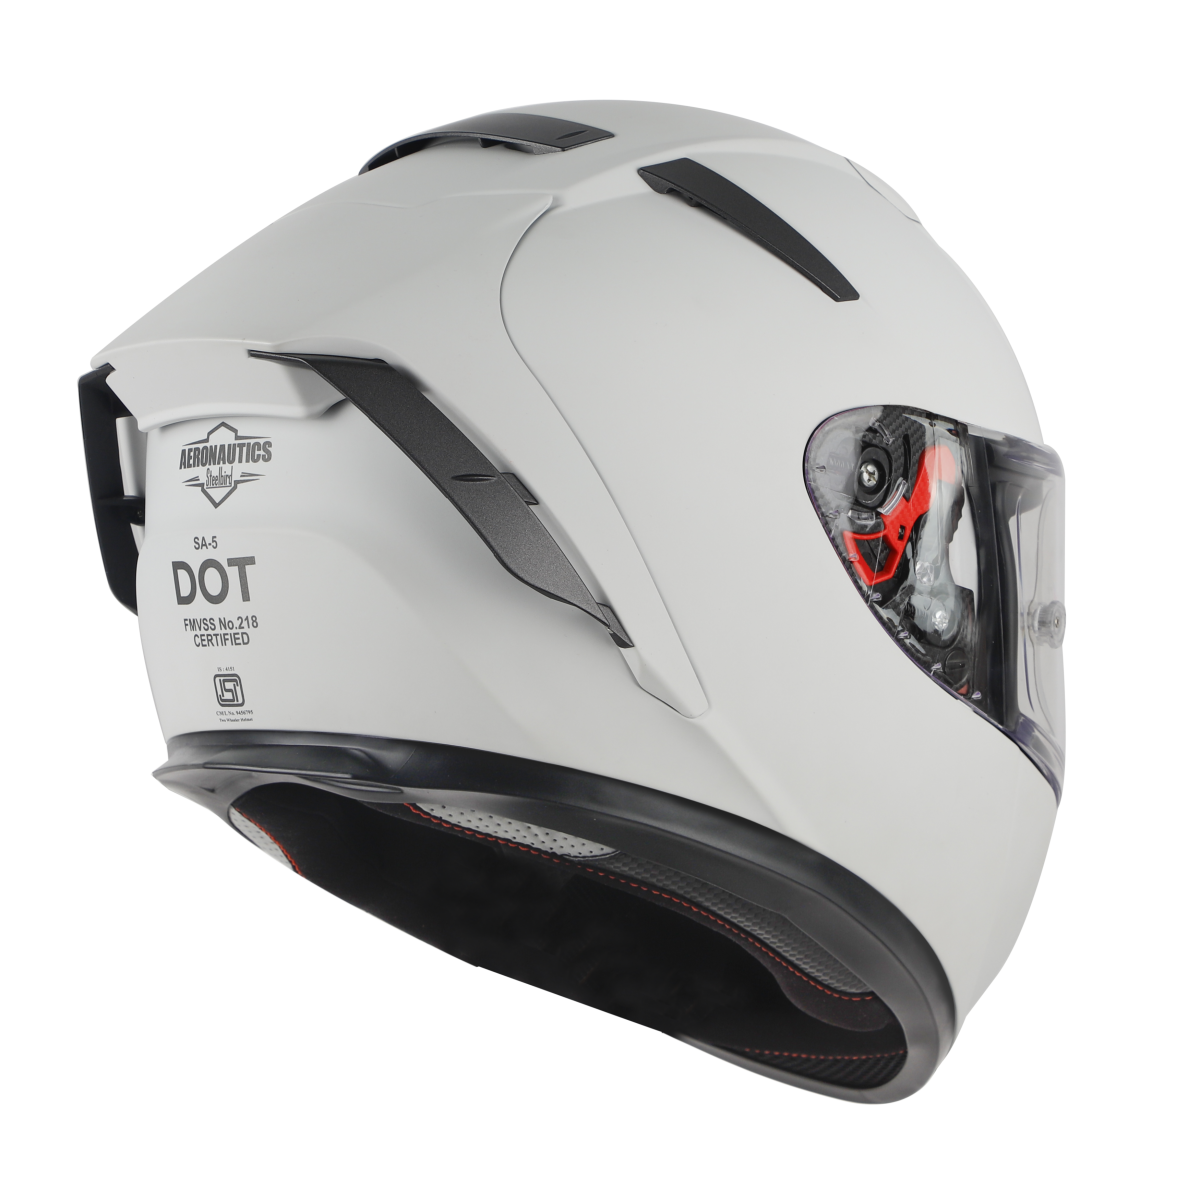 steelbird-launches-sa-5-dot-helmet-in-india-credr-blog-latest-news